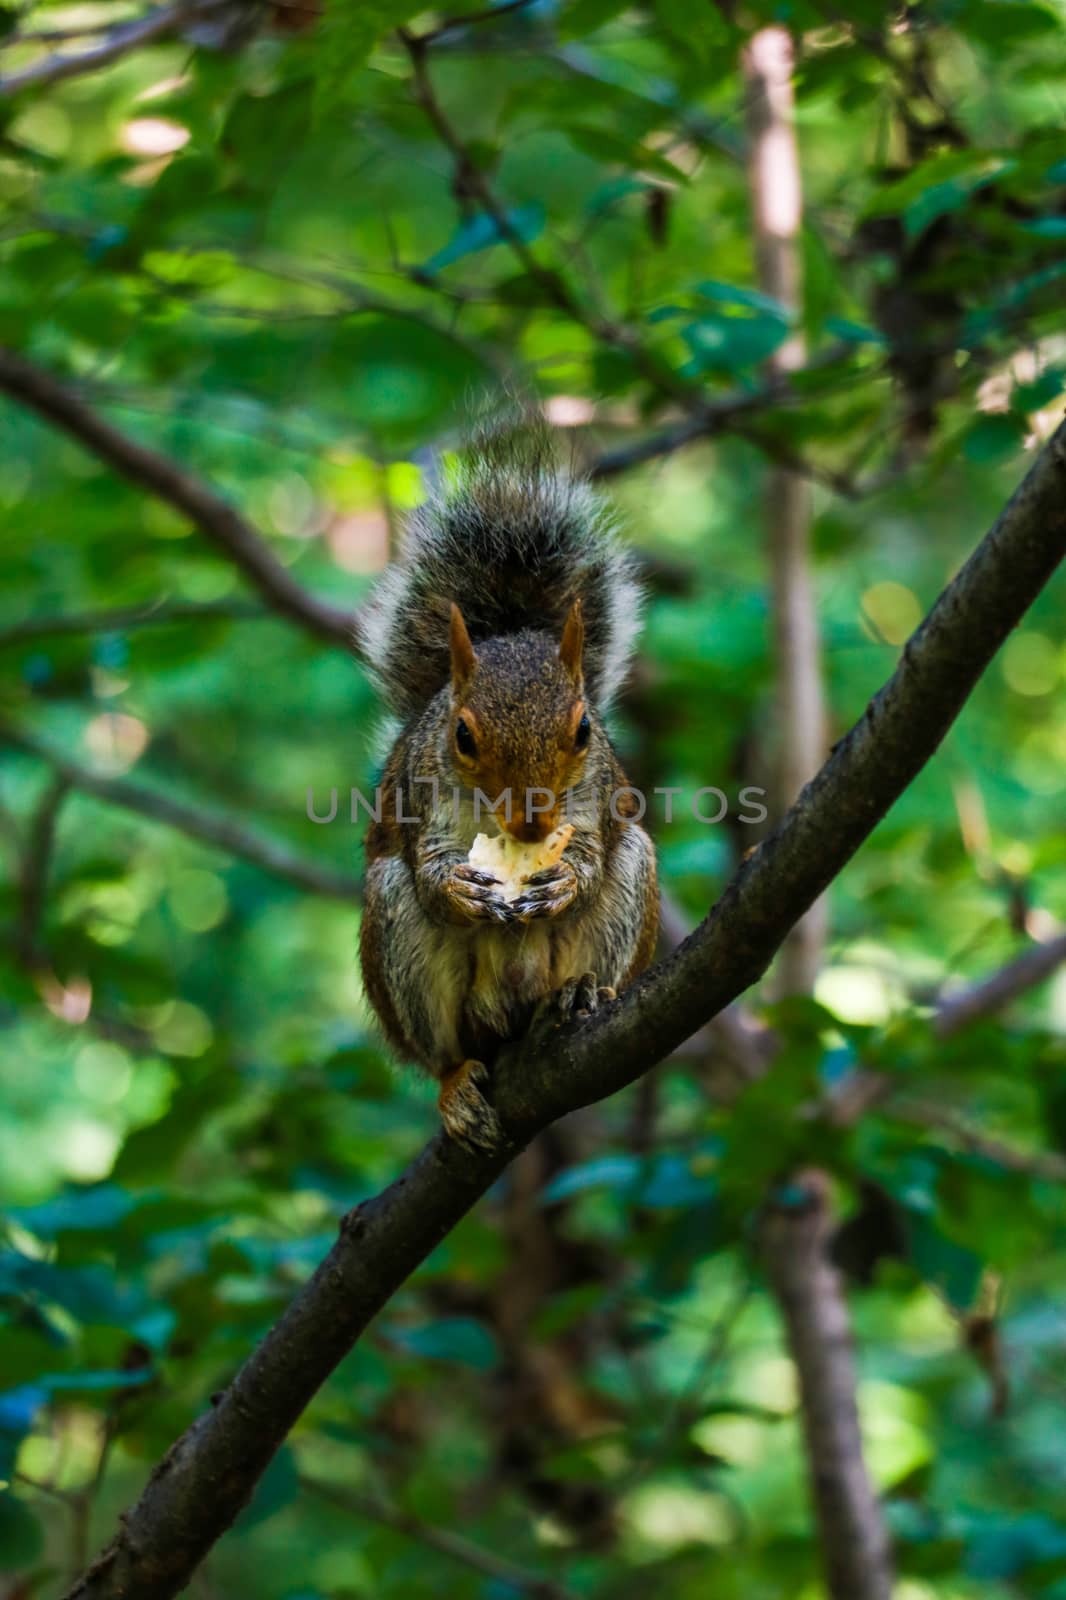 The little squirrel feasting high up in a tree. by kip02kas